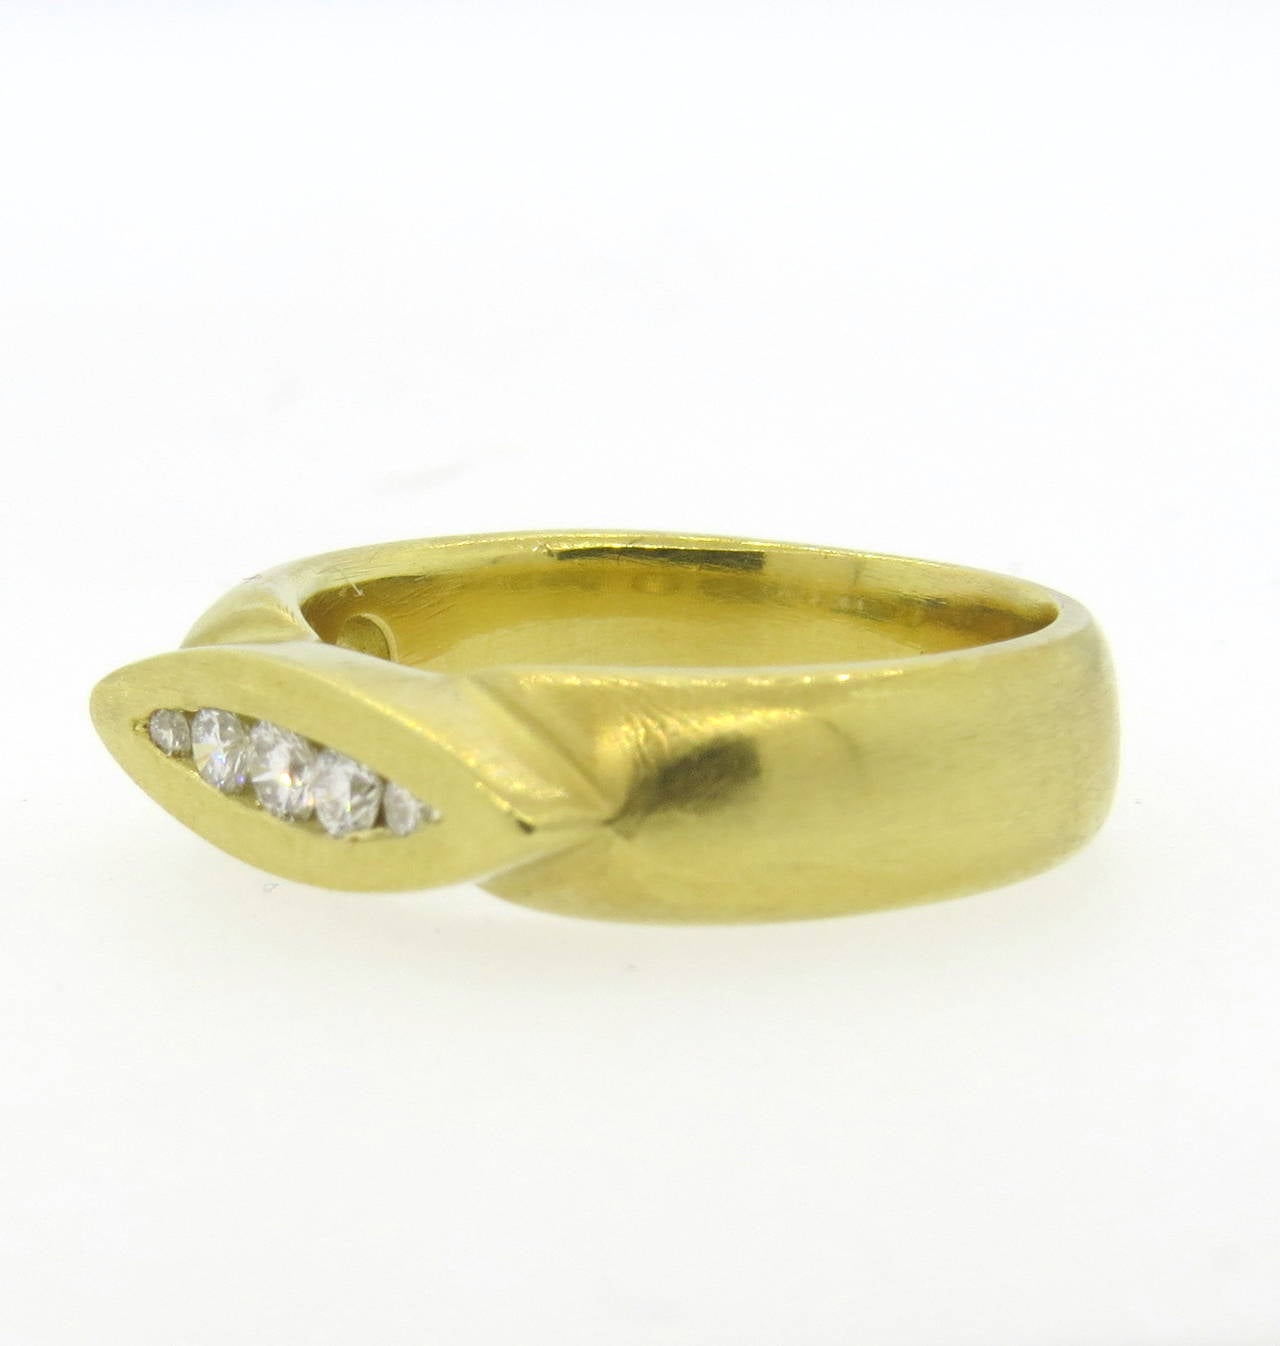 18k Gold ring by Elizabeth Rand, featuring approx. 0.20ctw in G/VS diamonds. Ring size 9, ring top is 5.7mm x 20mm. Marked E.Rand,750. Weight - 12.8 grams